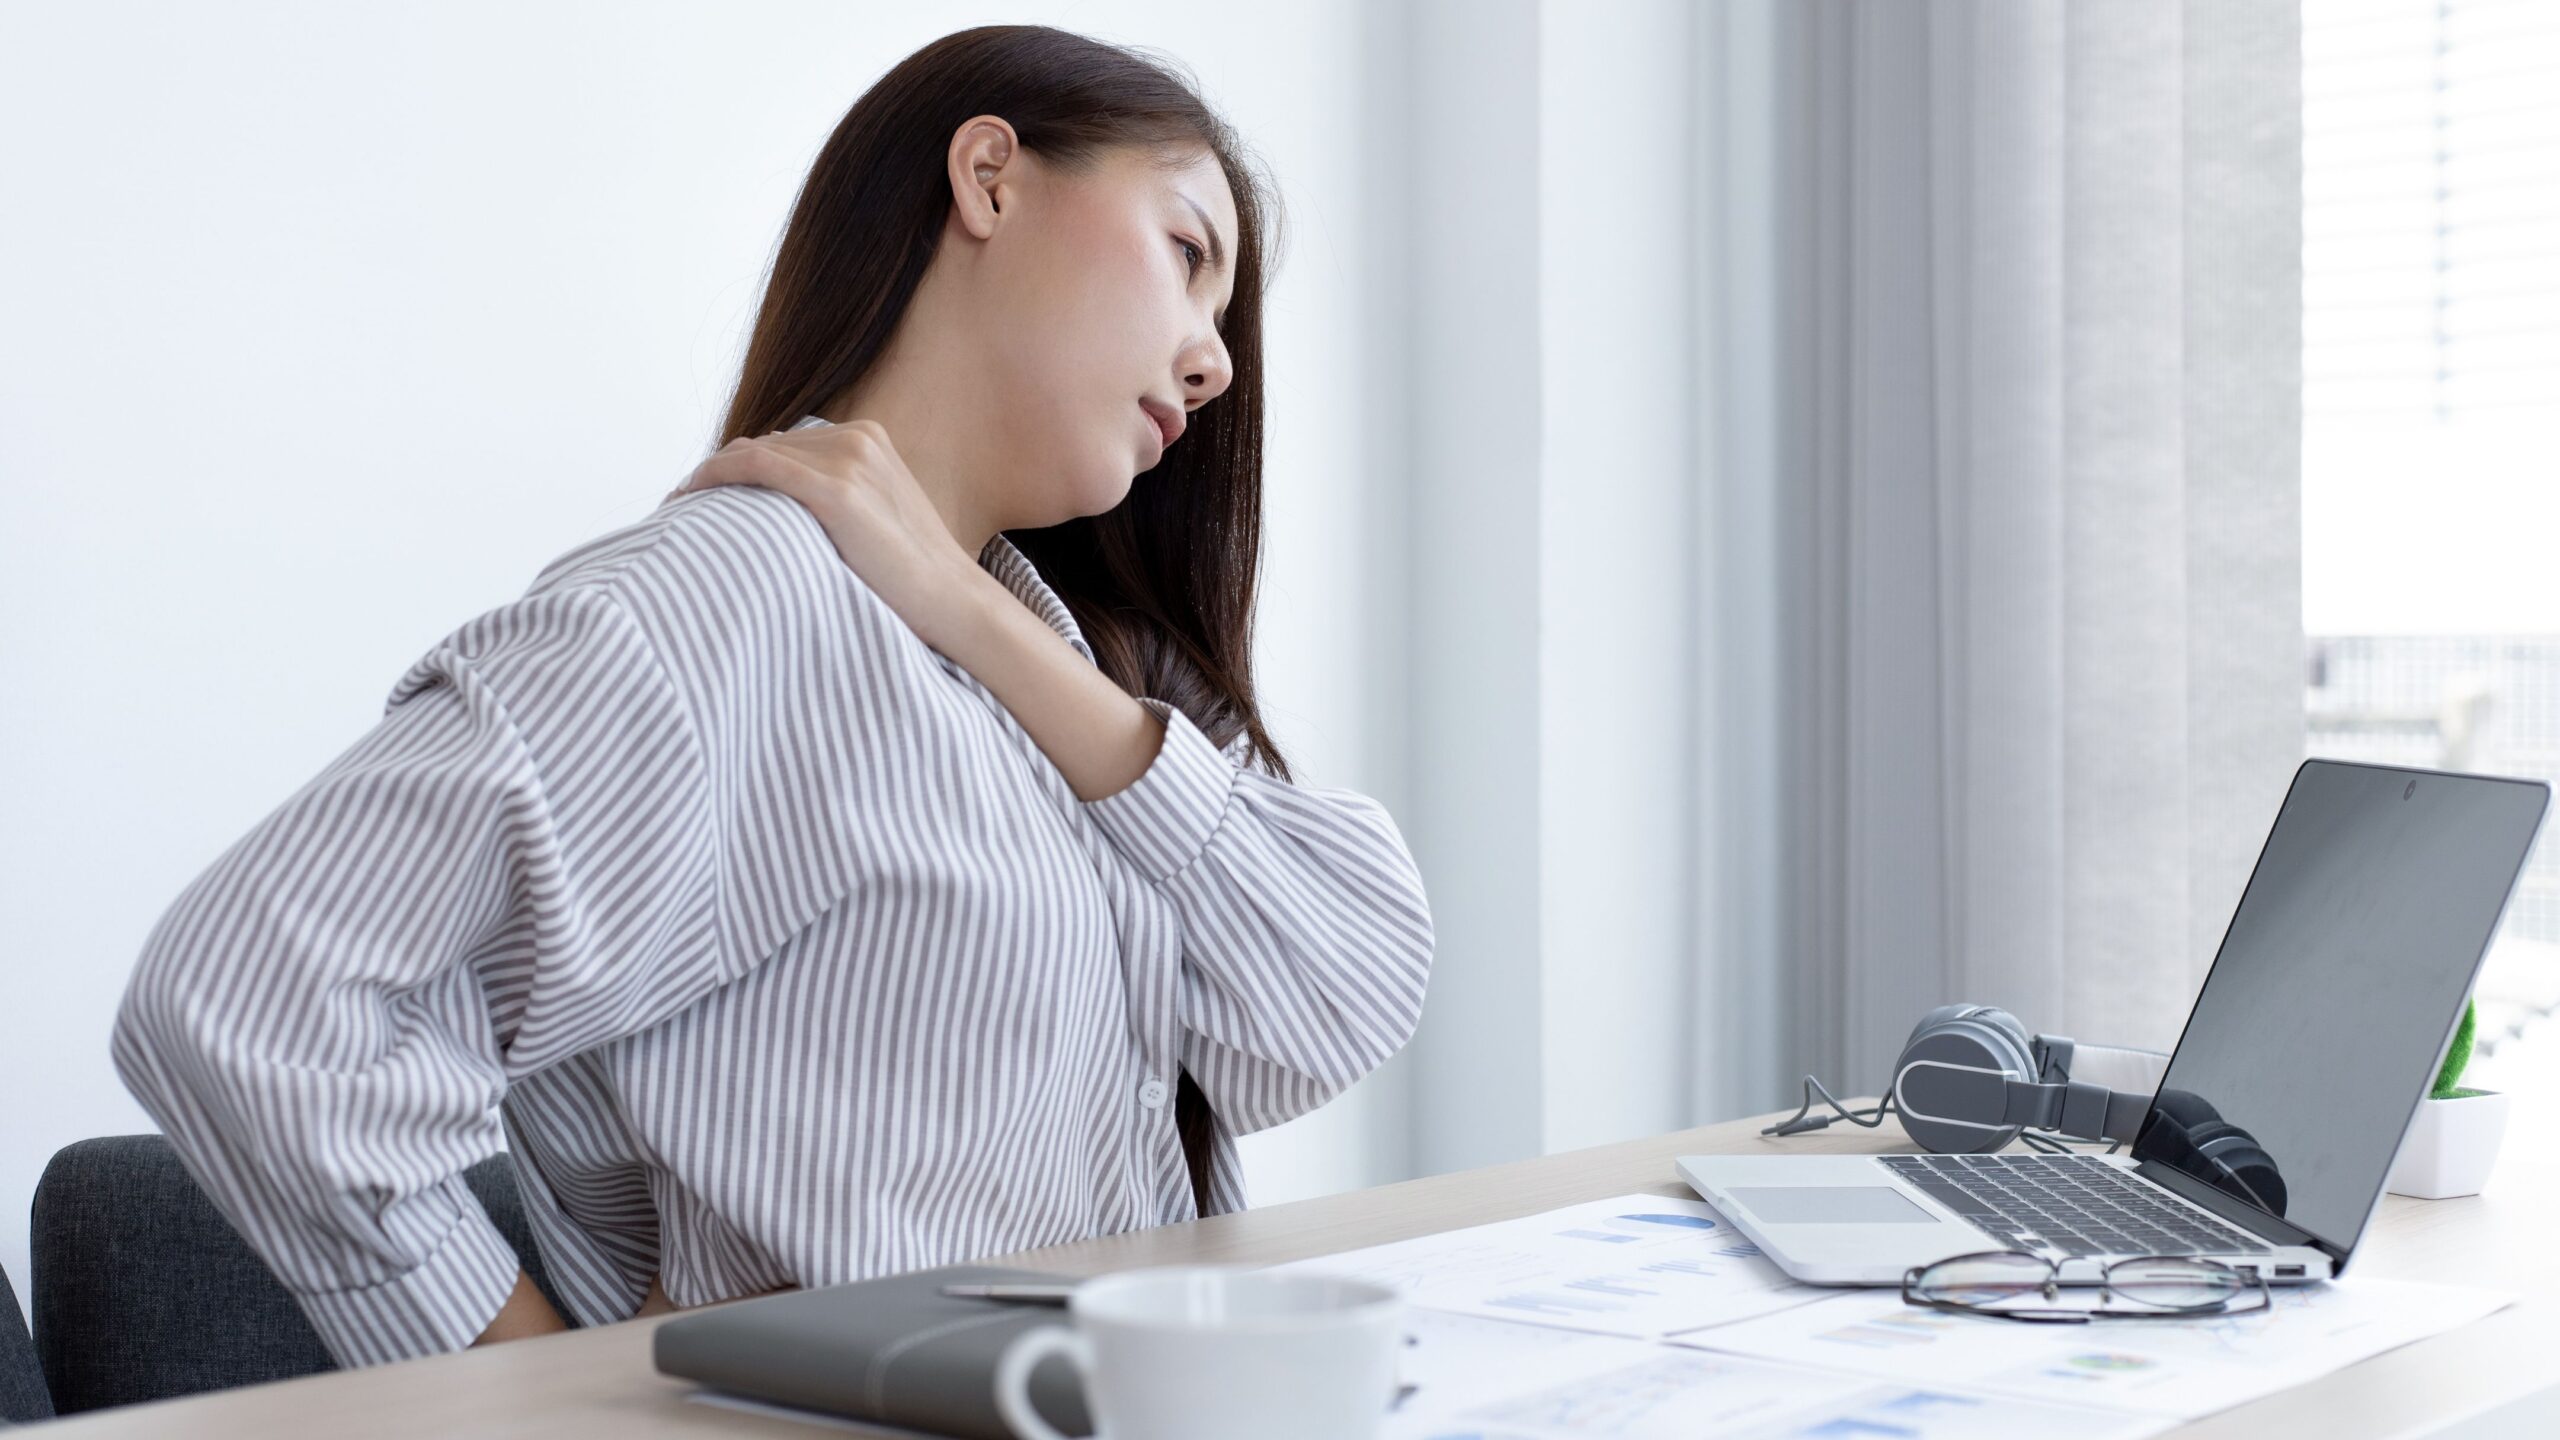 Feeling Tired at Work? It Could Be That Your Work Area Isn’t Ergonomic